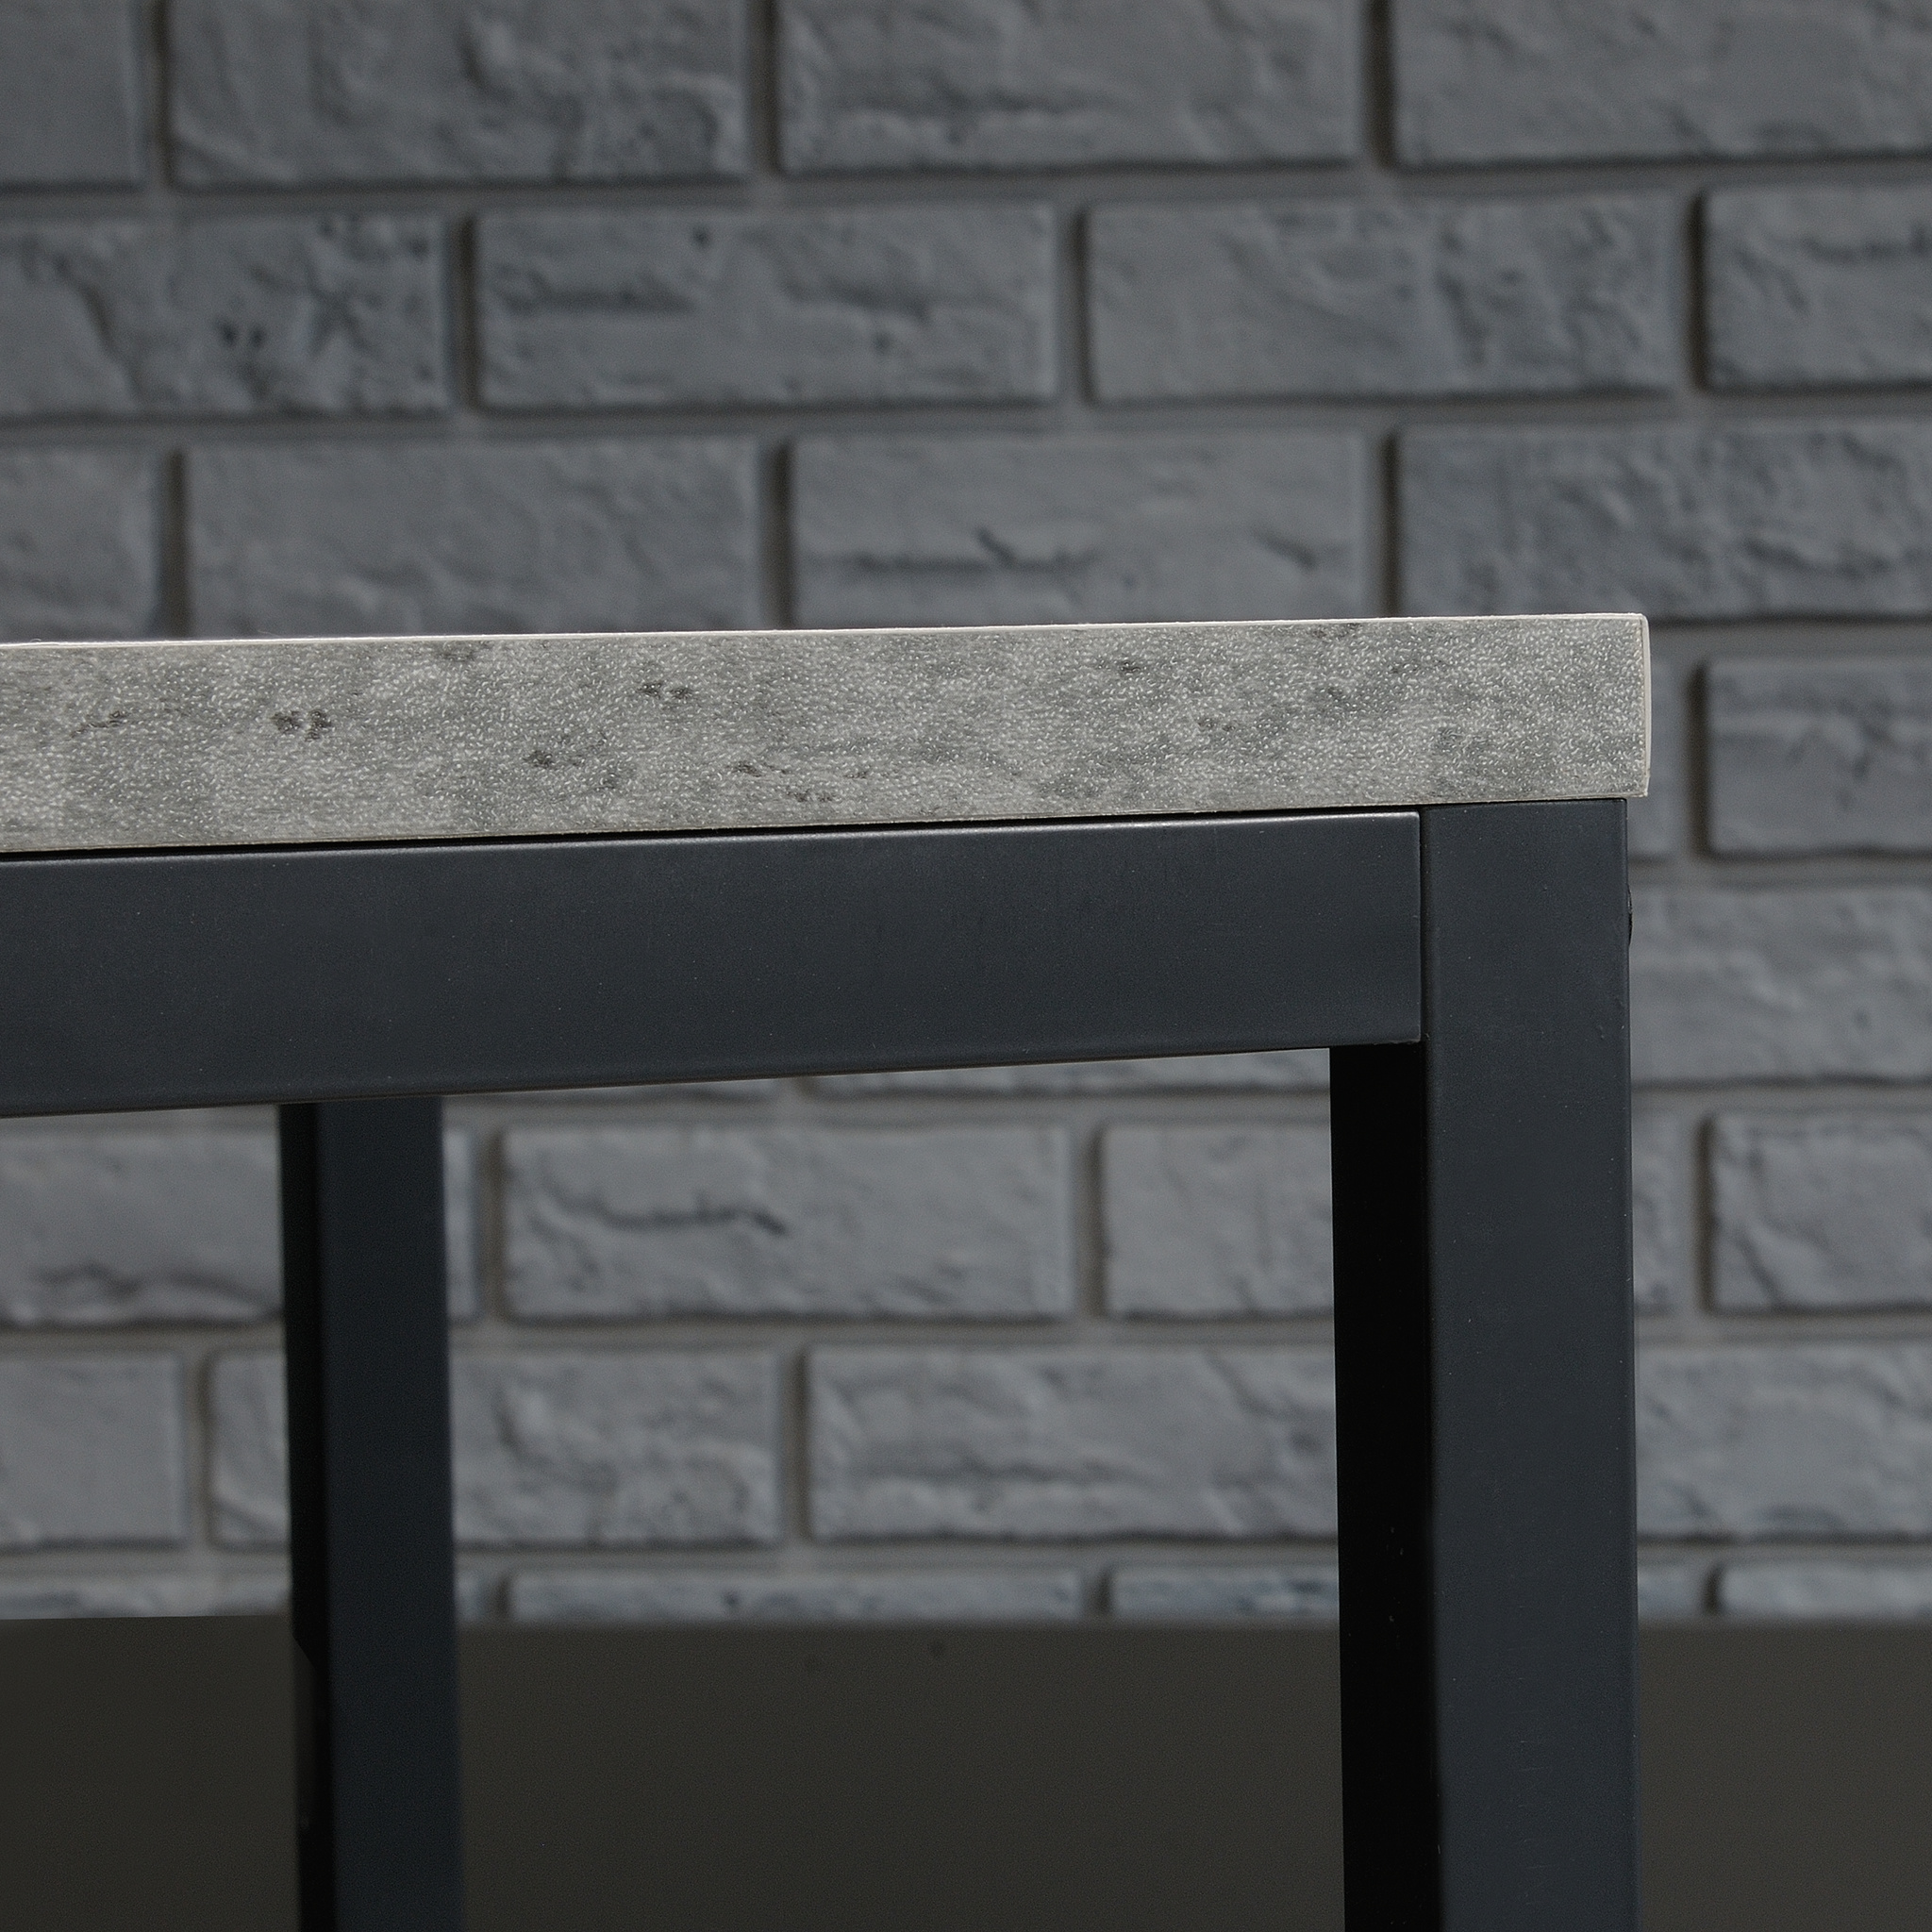 Curiod Square Metal Frame End Table, Faux Concrete Finish - image 4 of 9